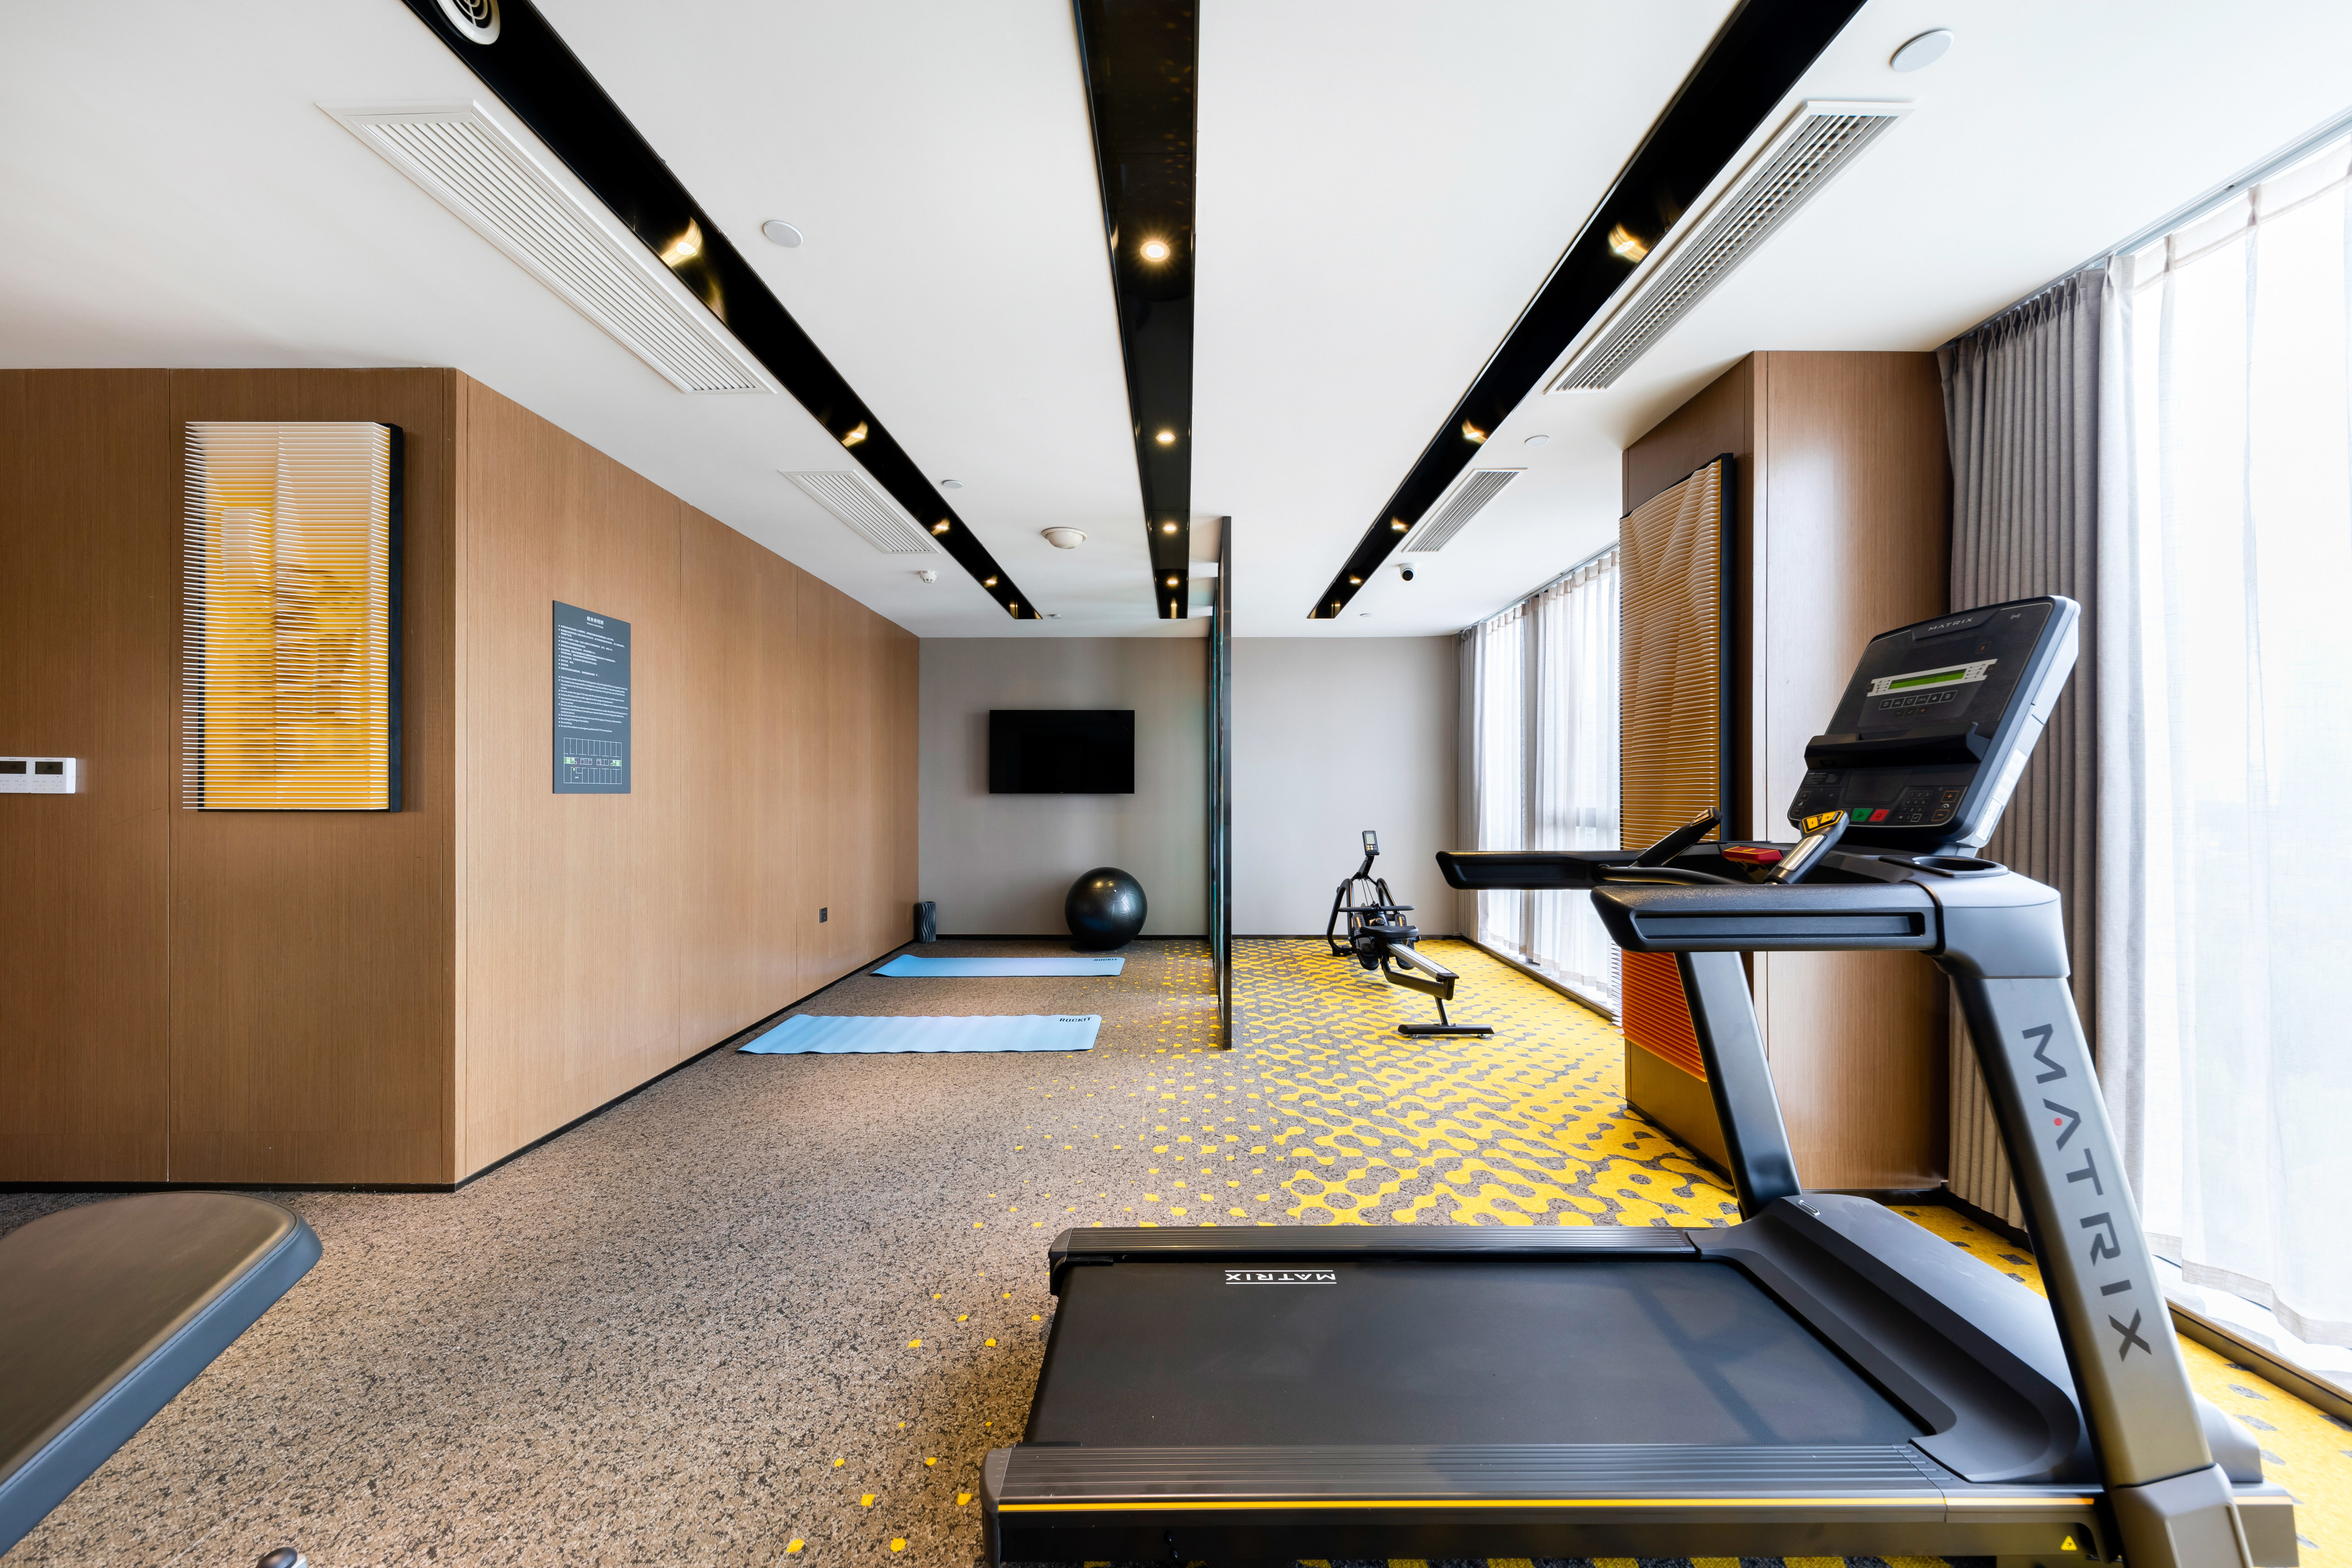 Fitness center with treadmill and TV